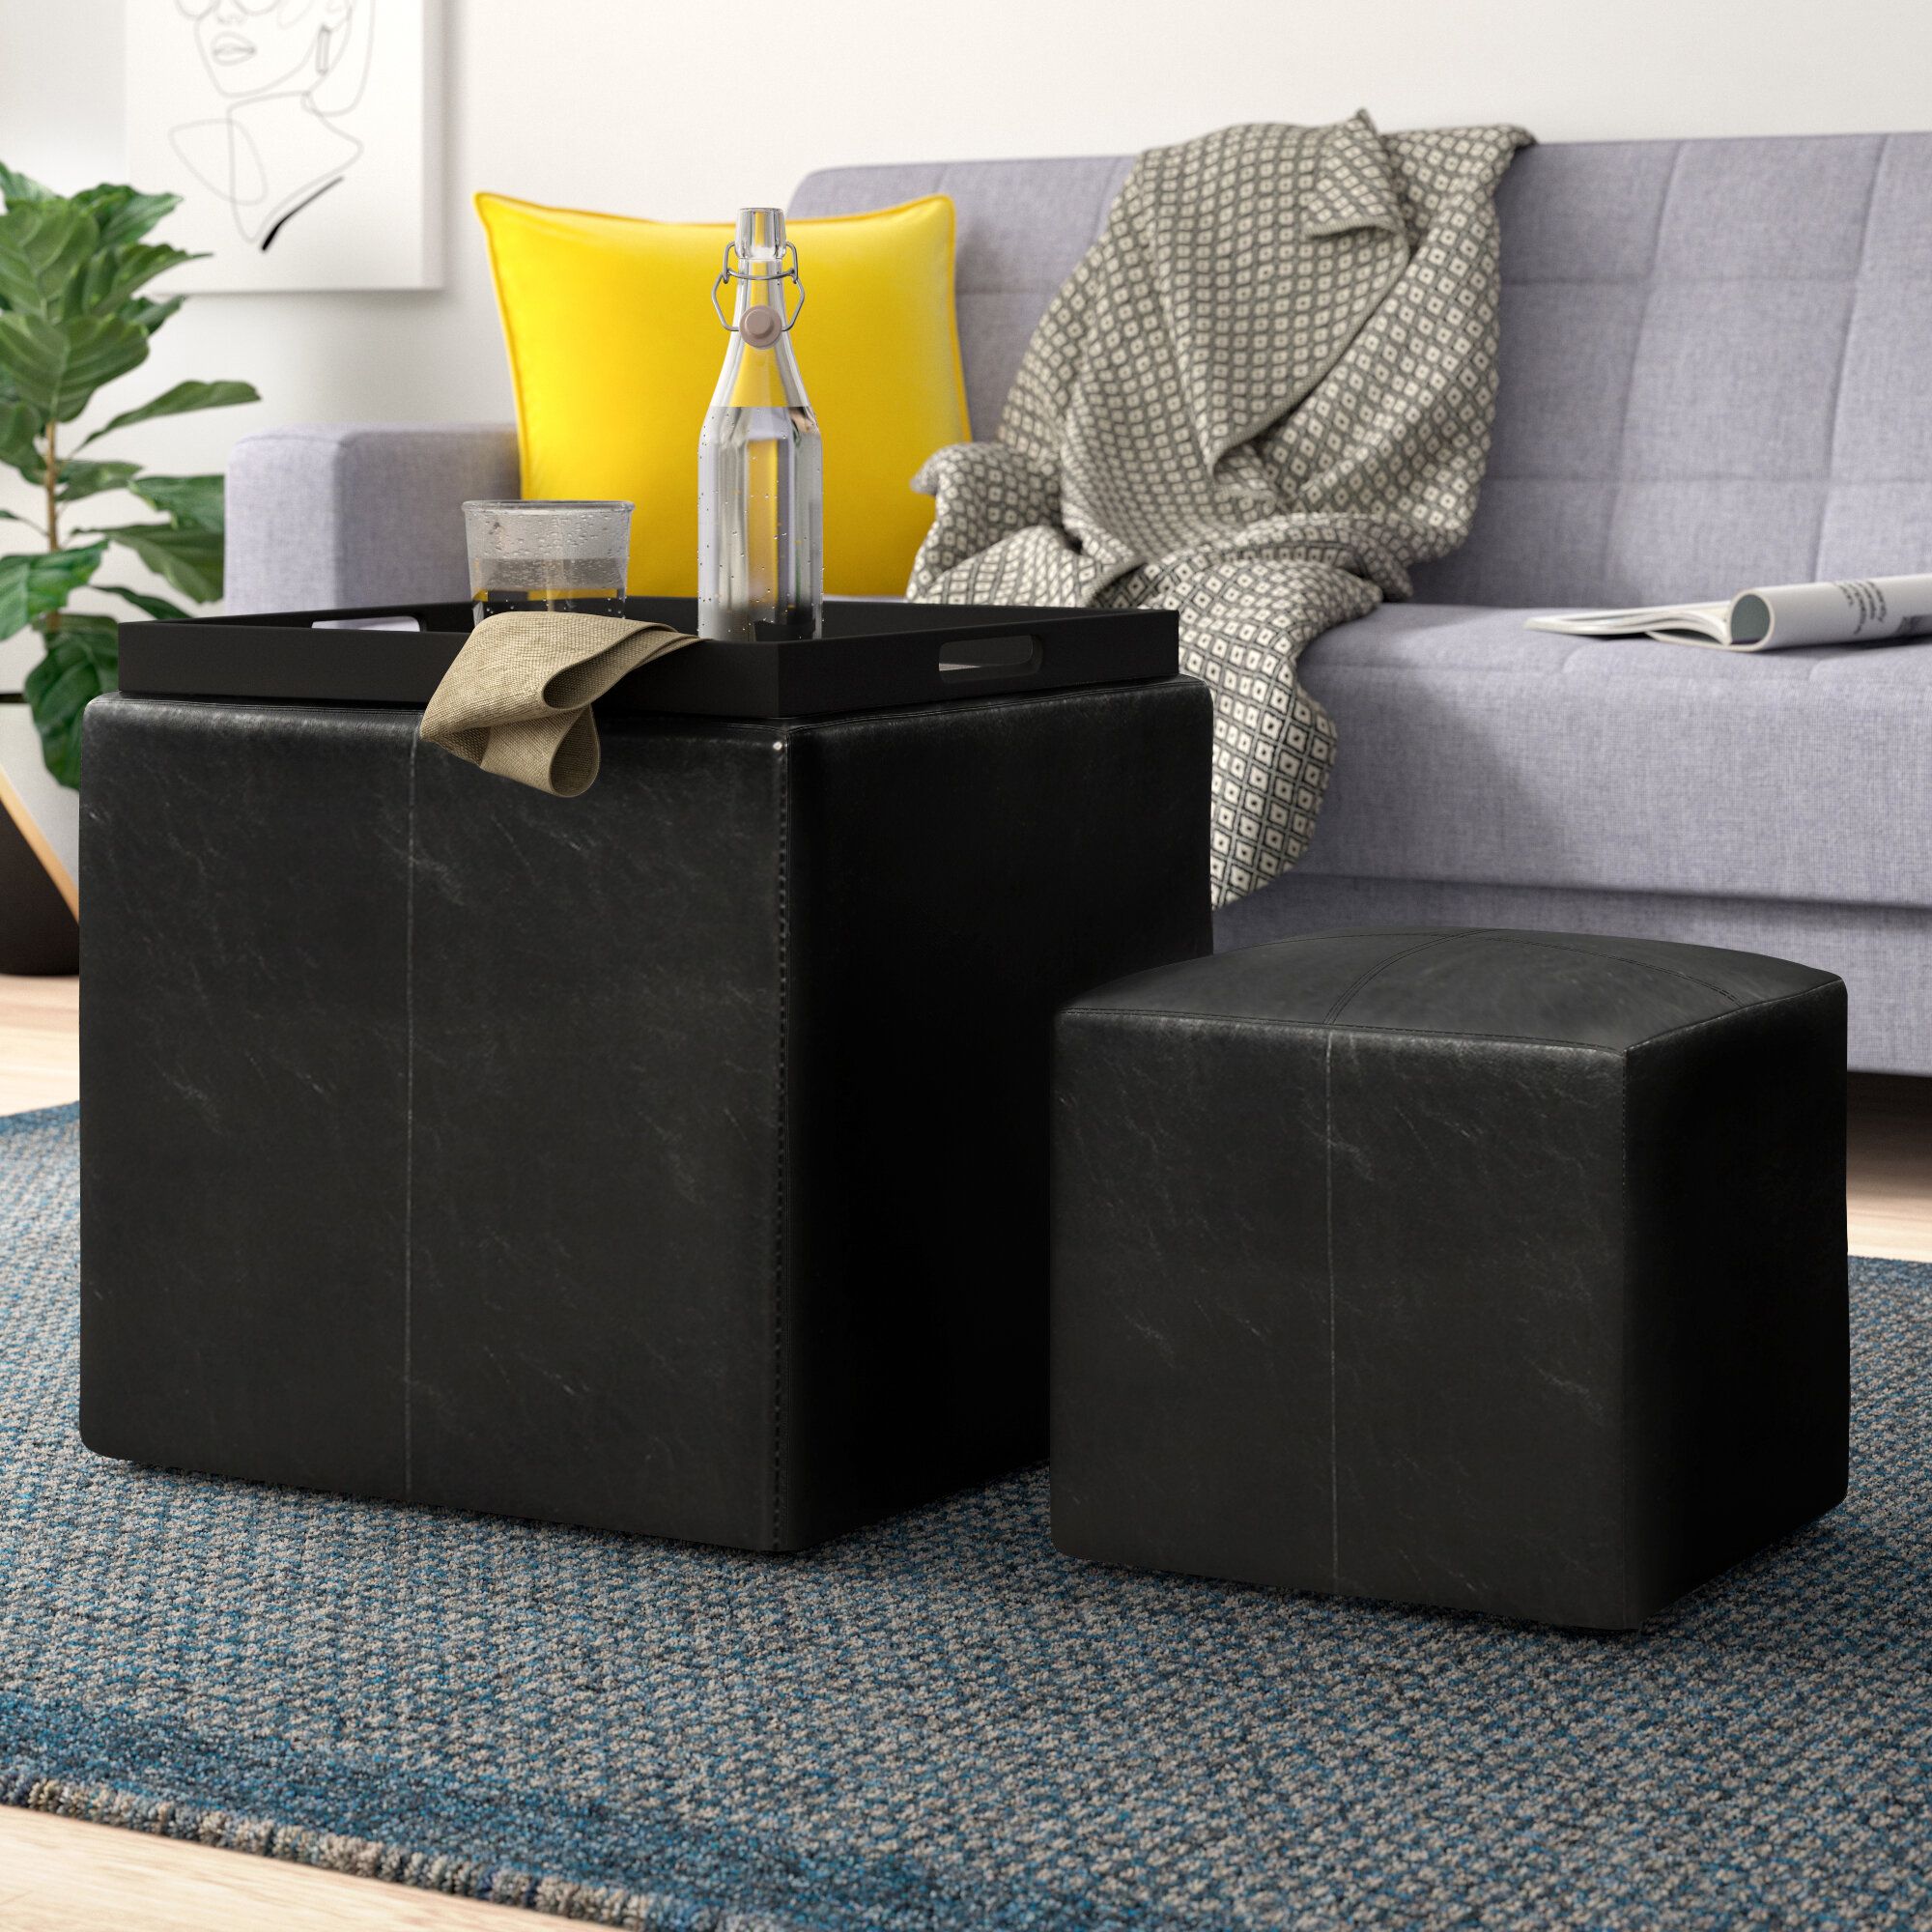 Zipcode Design™ Marla Square Ottoman With Stool And Reversible Tray &  Reviews | Wayfair With Regard To Ottomans With Reversible Tray (View 6 of 15)